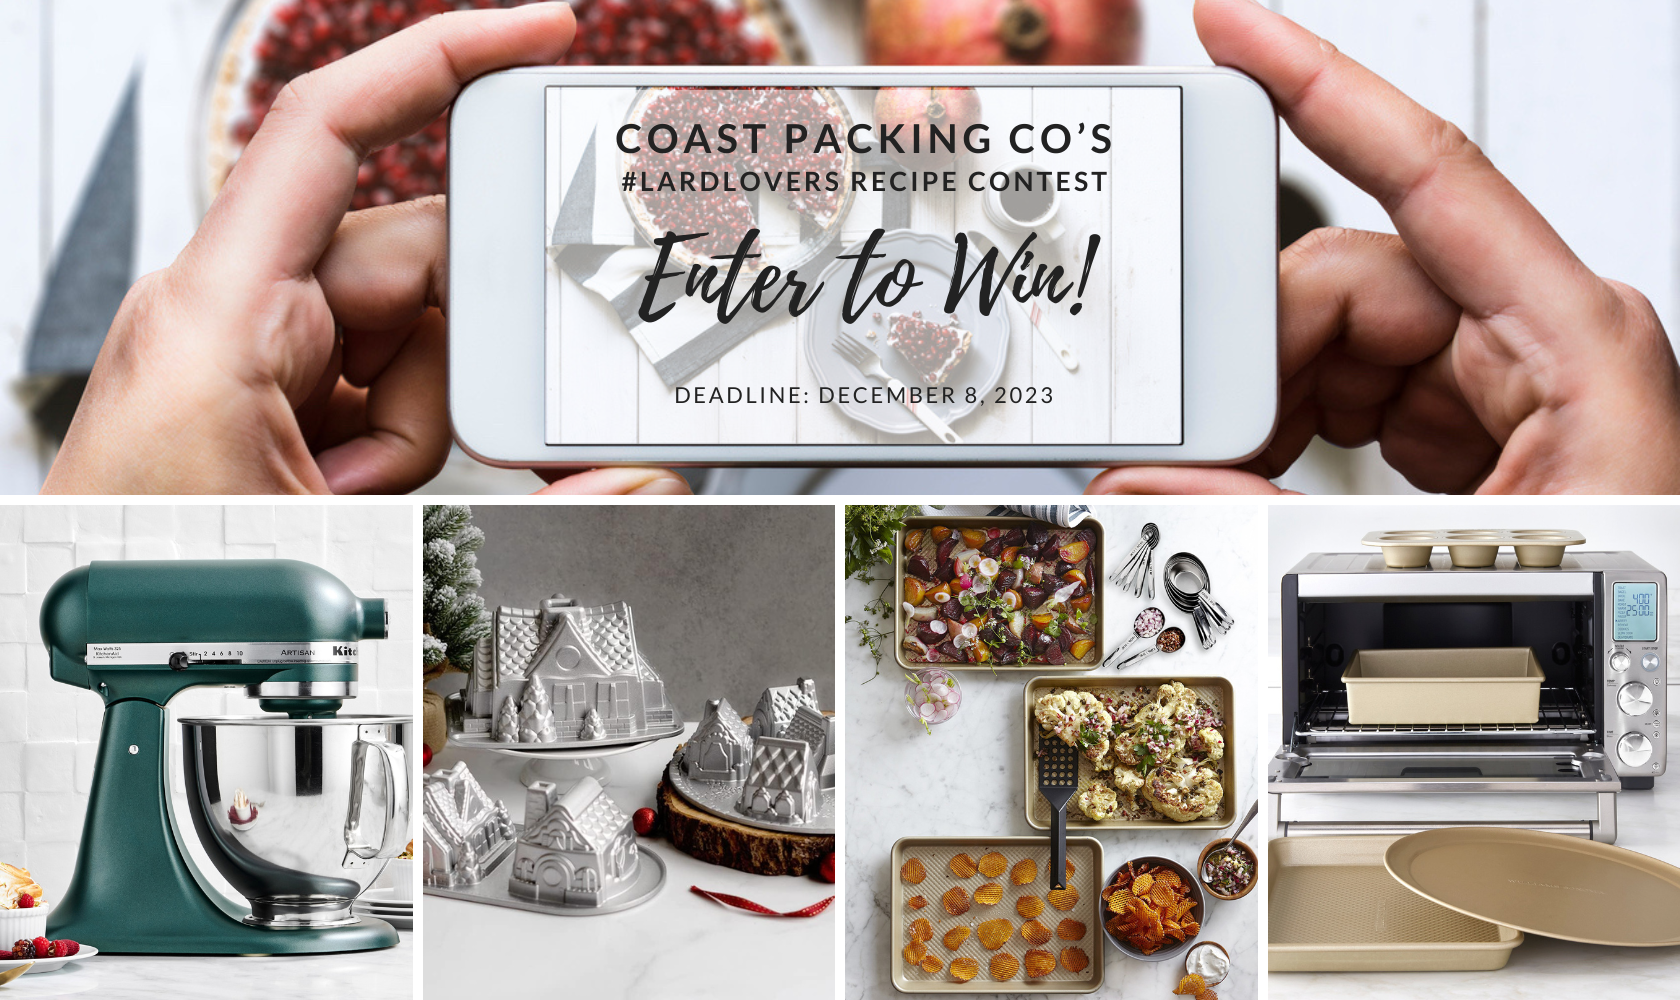 Calling All Home Cooks: Coast Packing’s 7th Annual #LardLovers Recipe Contest Means Big Flavor – and Stellar Prize Lineup 